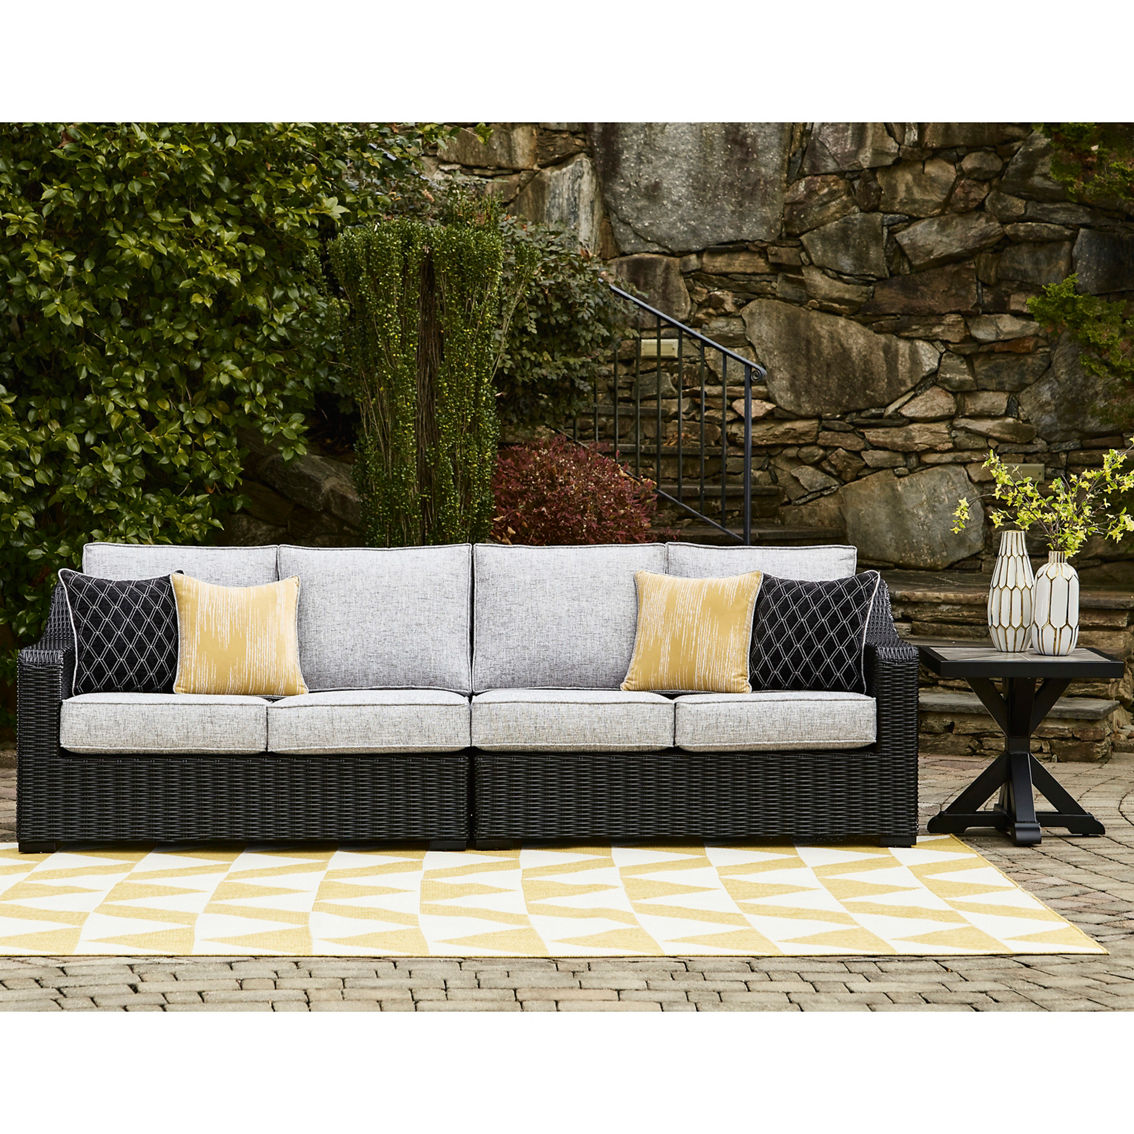 Signature Design by Ashley Beachcroft 5 pc. Outdoor Sectional with Firepit Table - Image 2 of 9